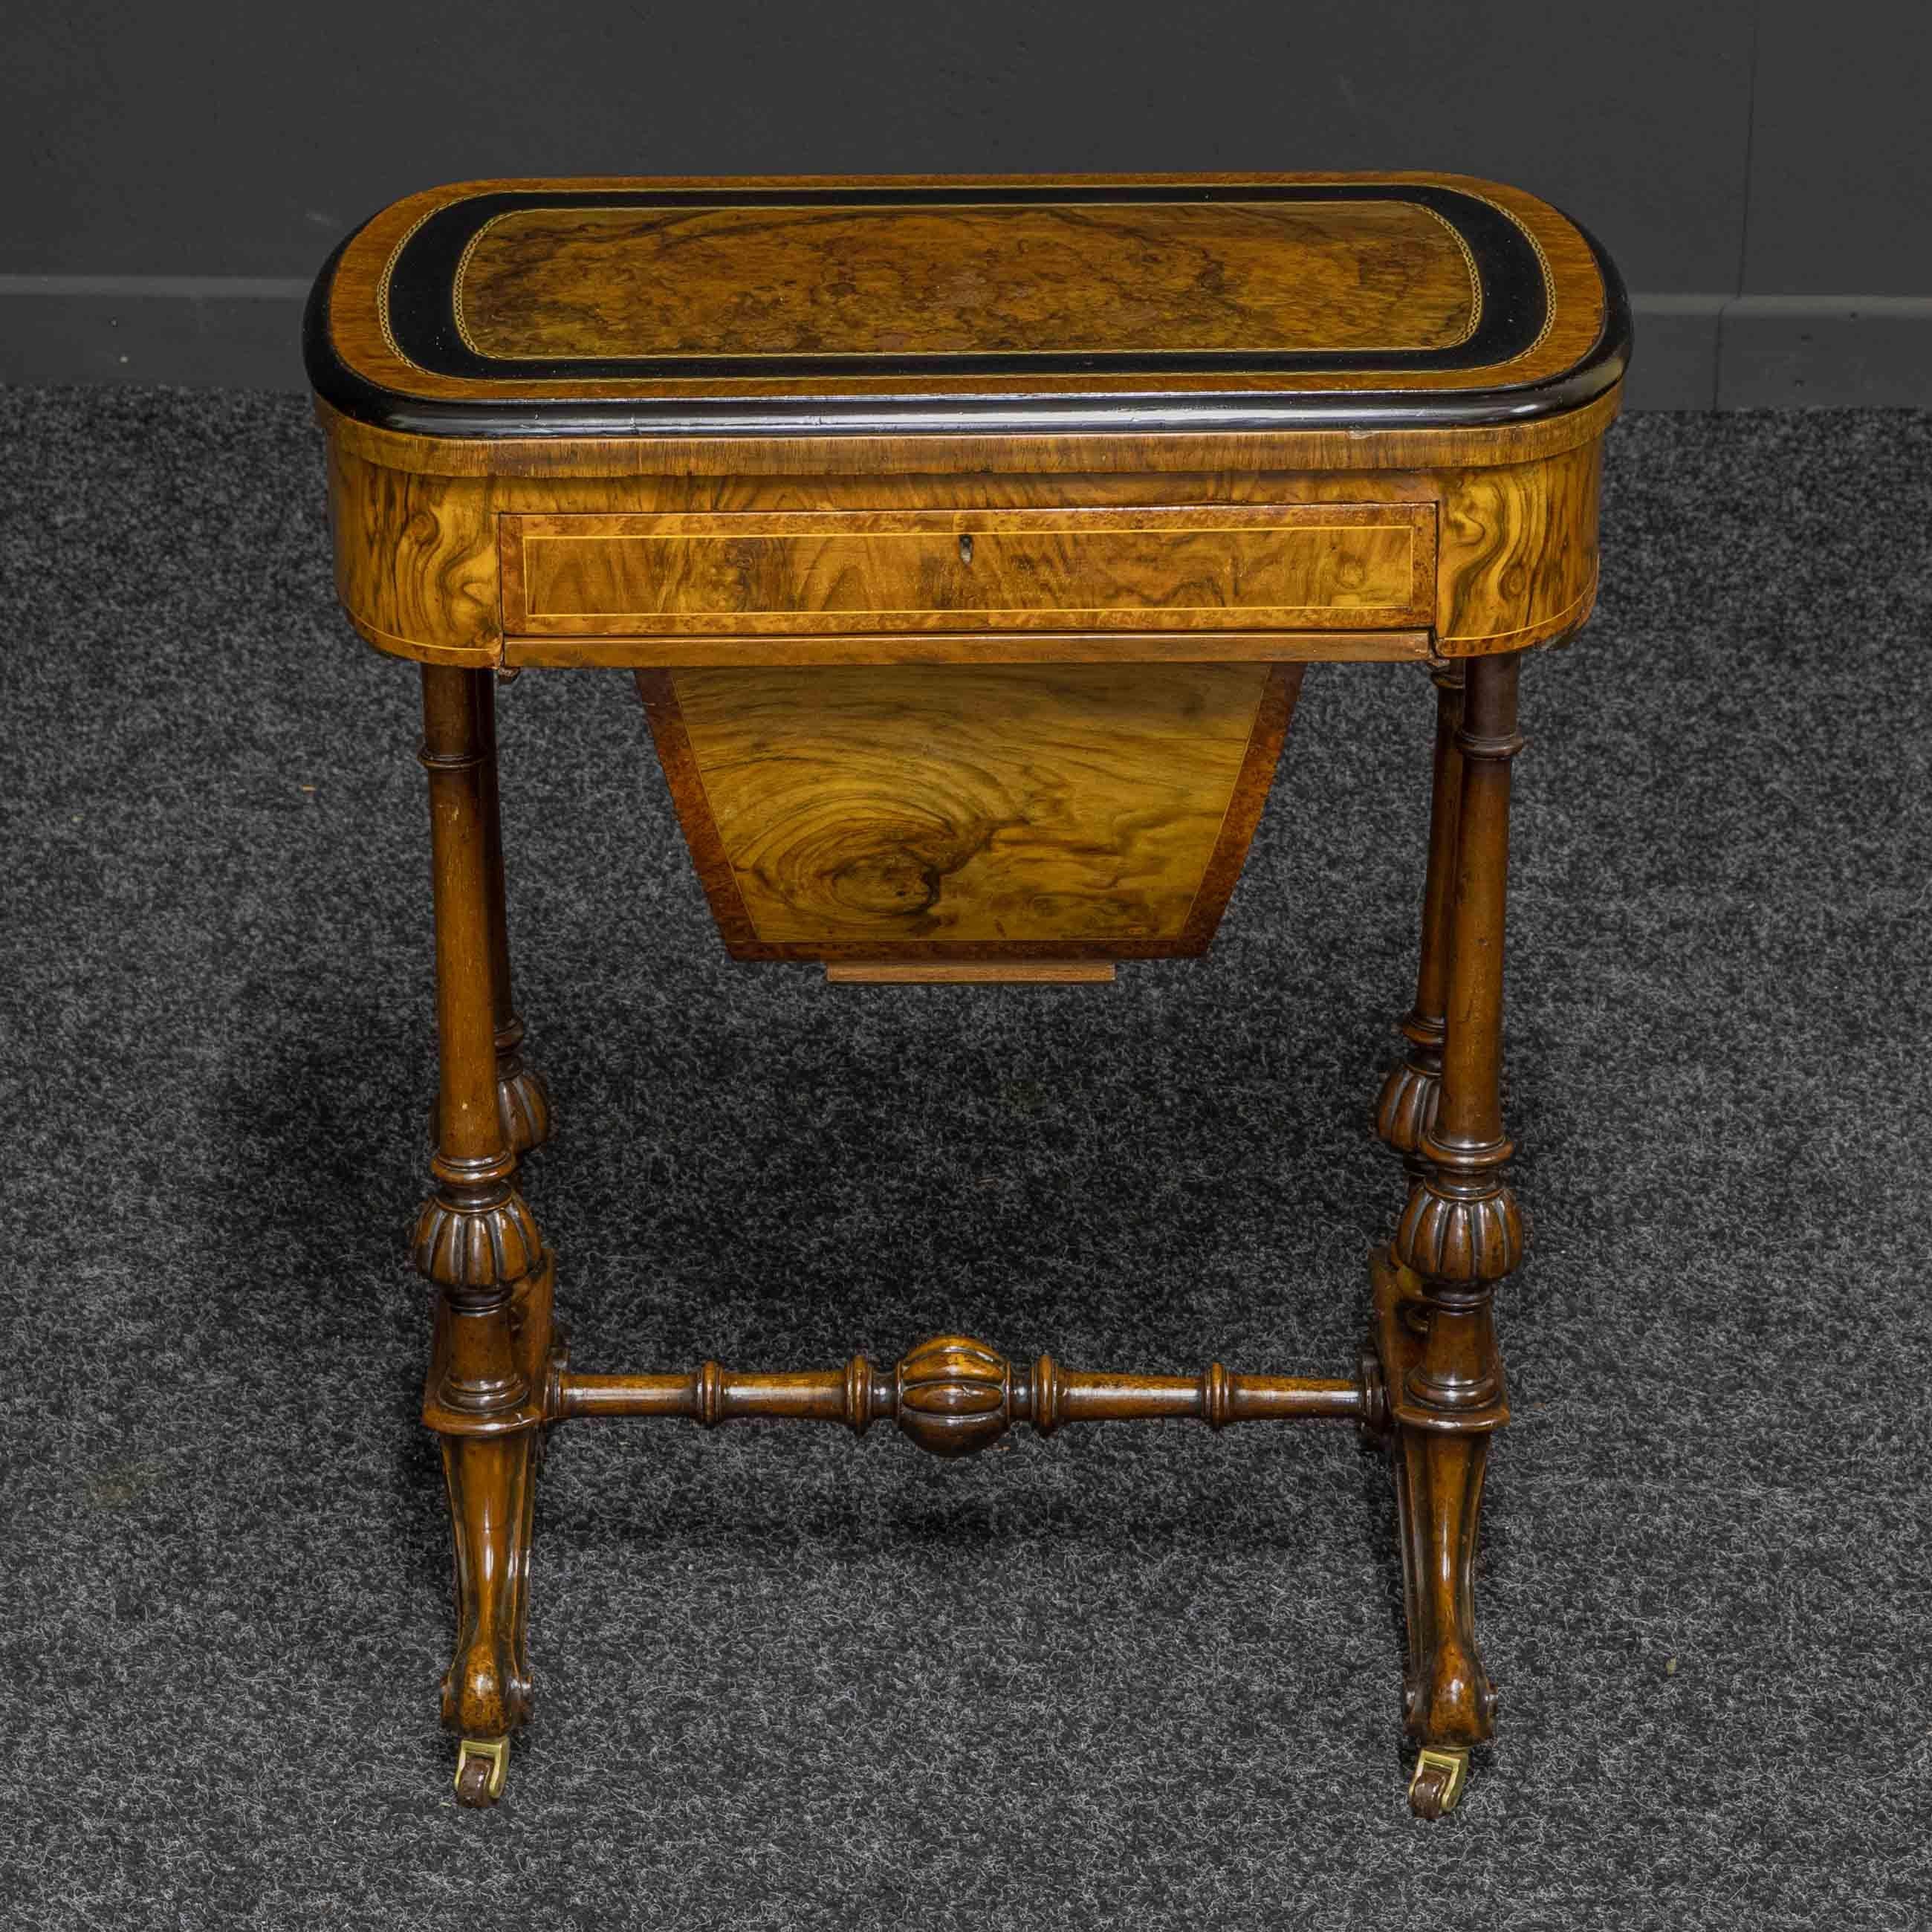 A superb Mid Victorian burr walnut veneer games/sewing table of much above average quality. Sat on it's original brass and pot castors rising on swept cabriole legs with a turned and fluted central stretcher. Matched with double turned end supports